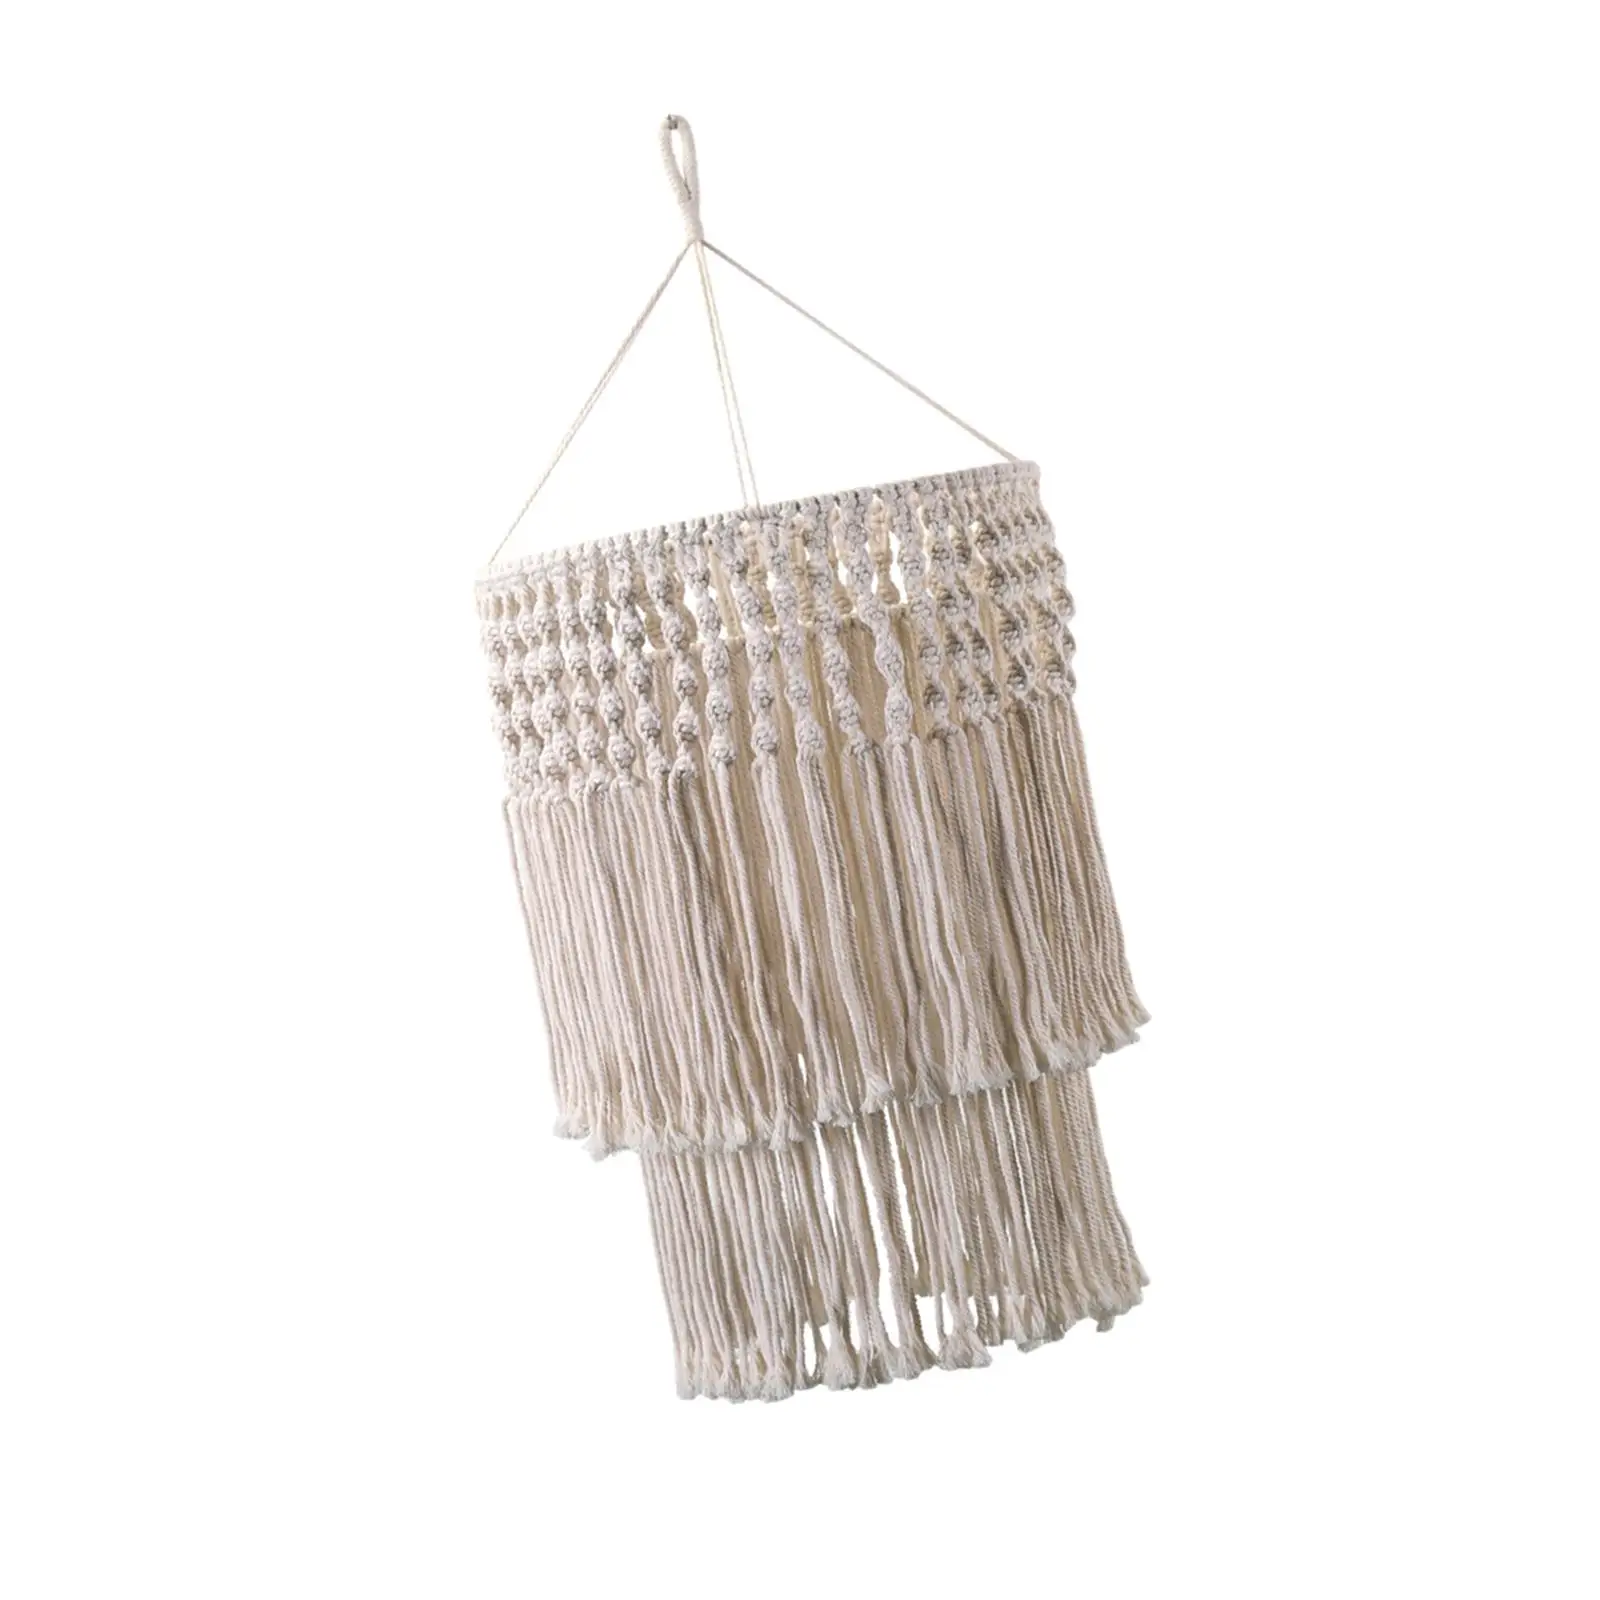 Nordic Macrame Lampshade Handwoven Pendant Light Cover for Home Decor